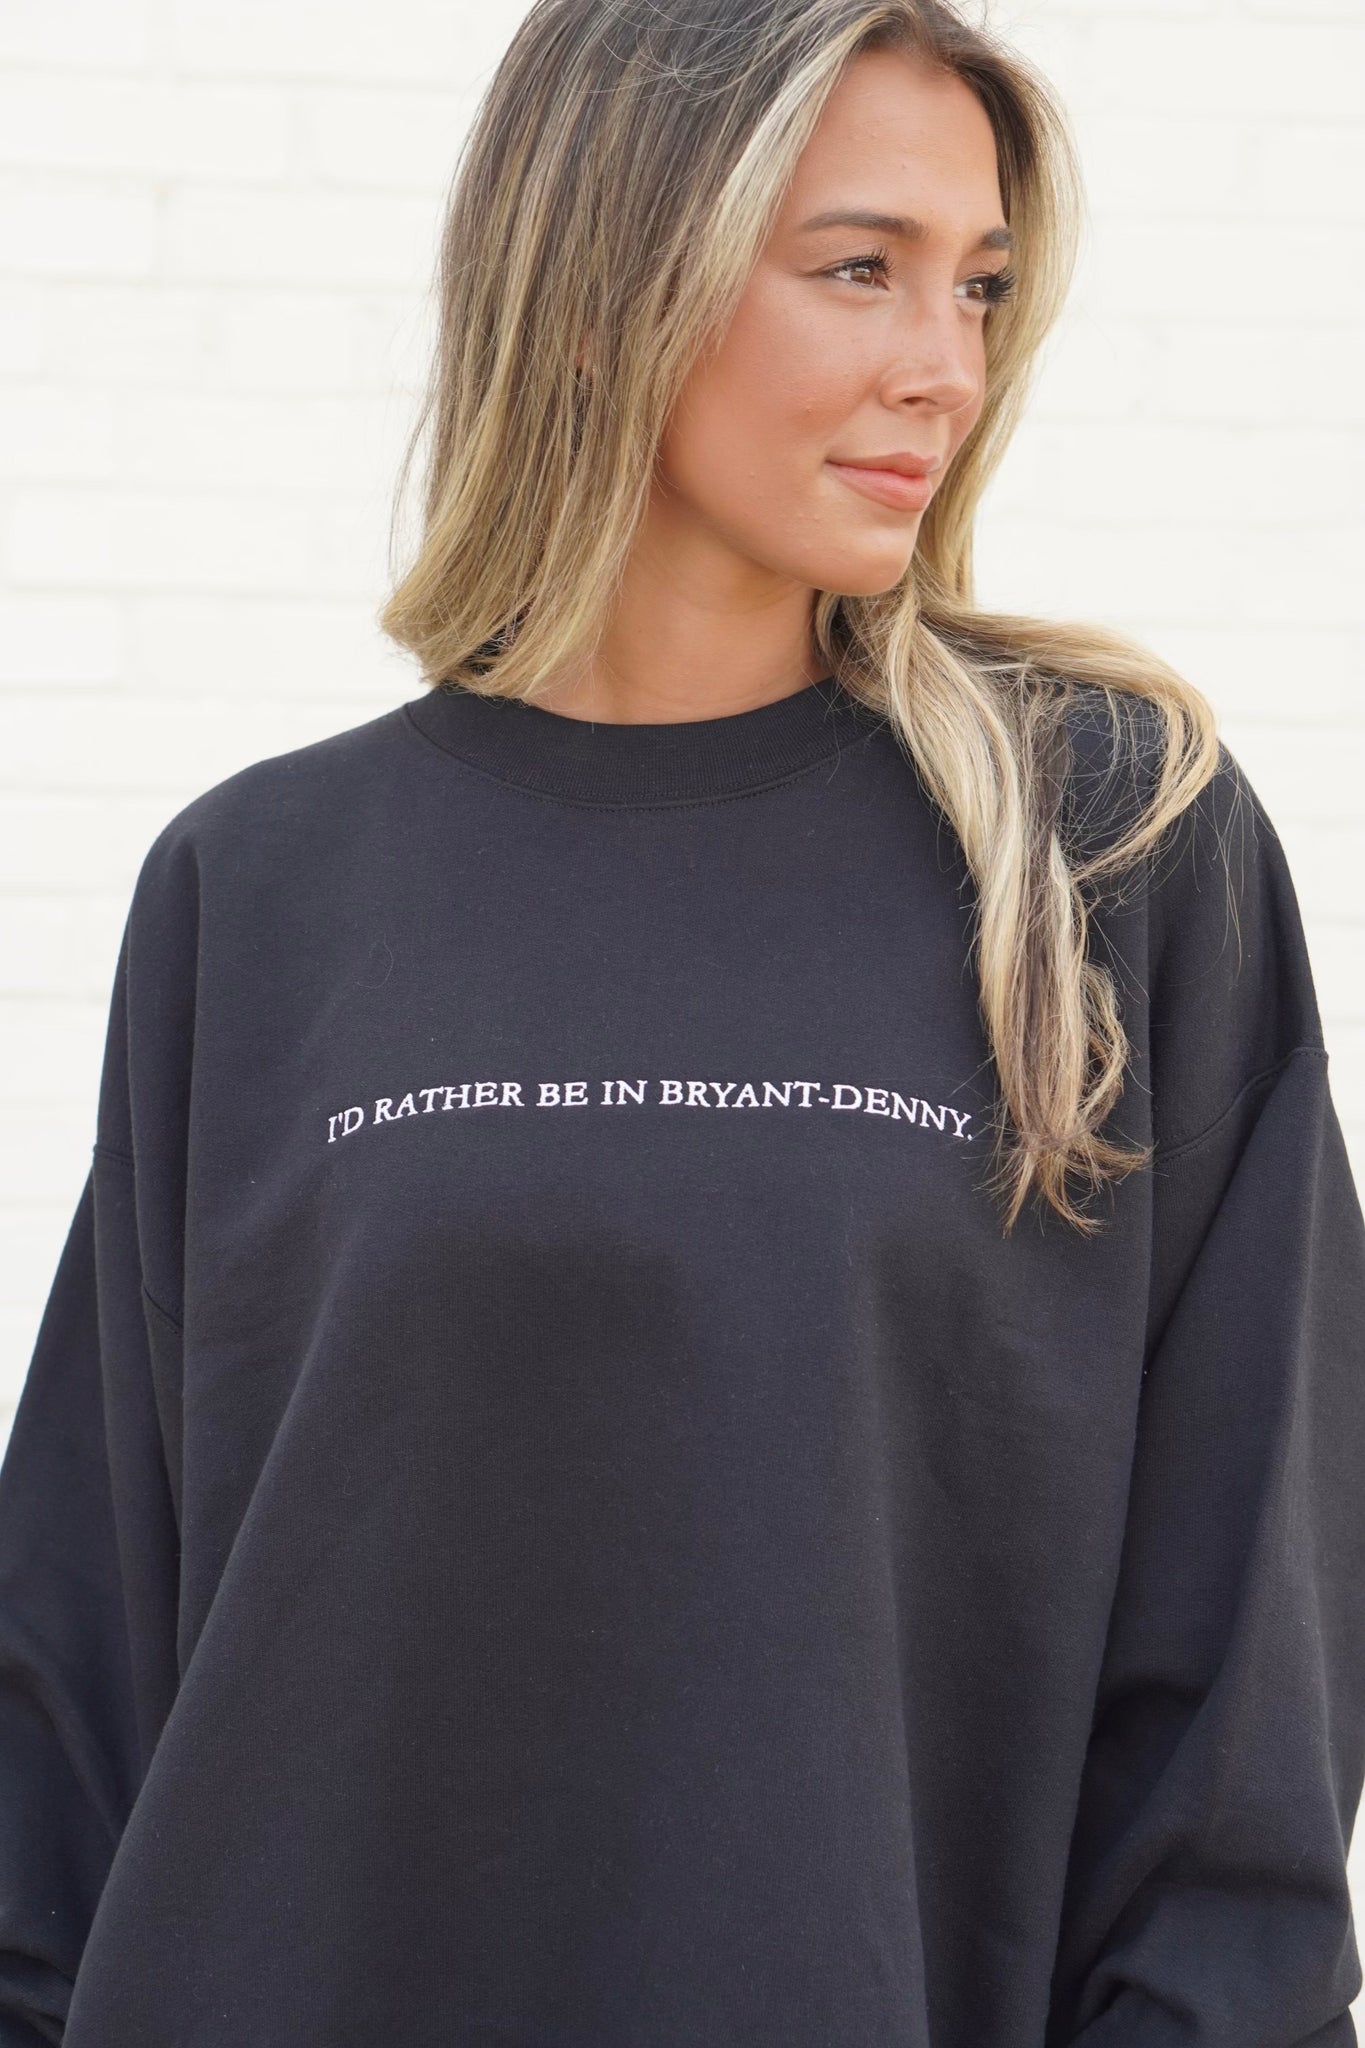 I'd Rather Be In Bryant-Denny Sweatshirt